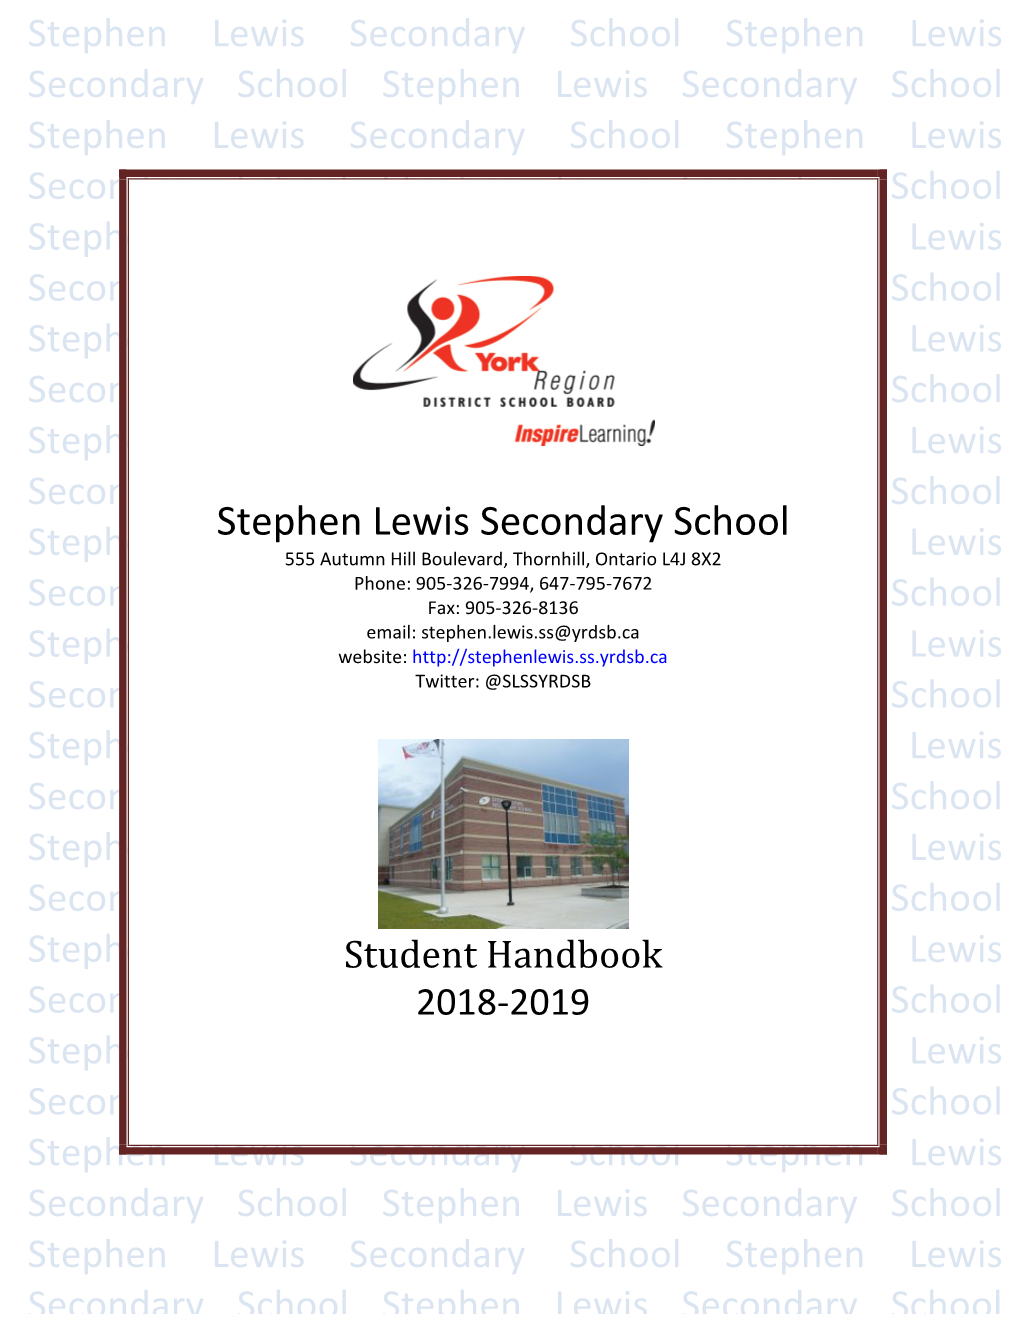 Student Handbook As Well As the Guide to the 2018-2019 School Year for Students and Parents